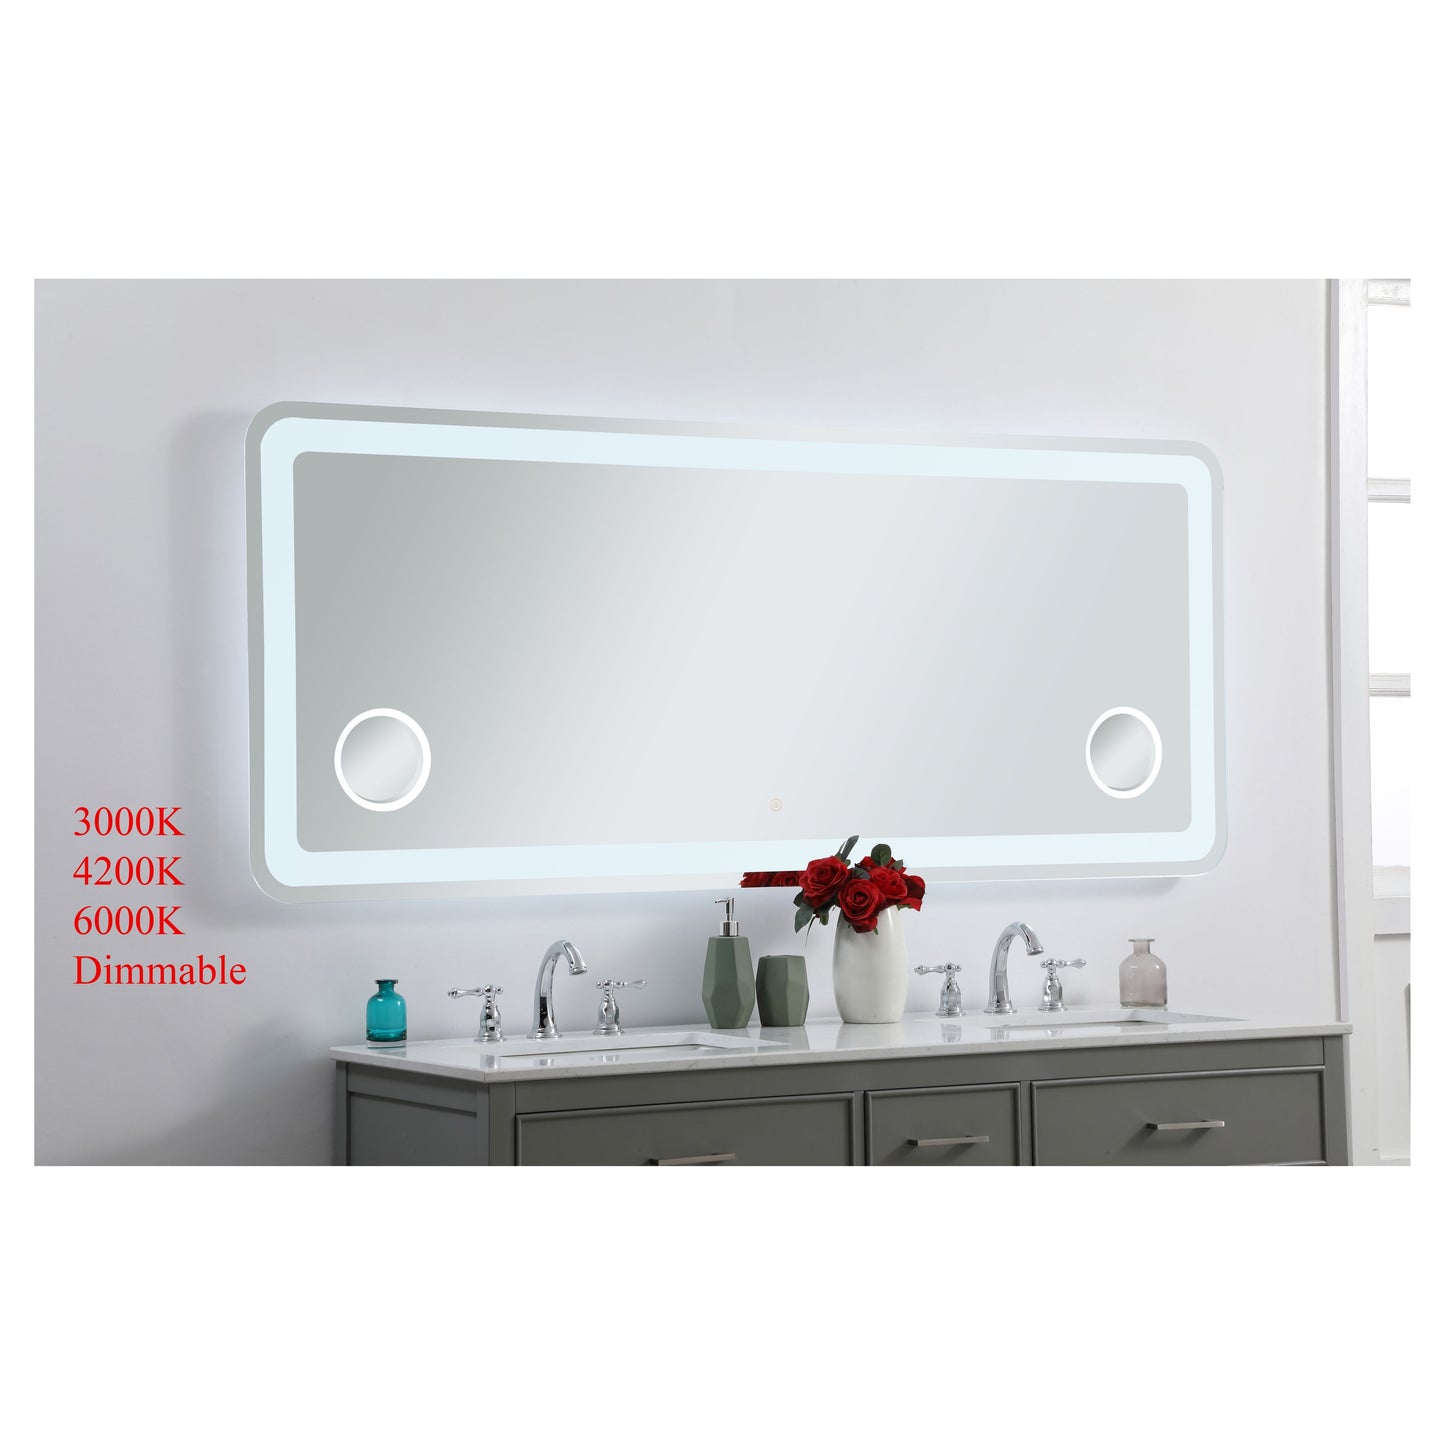 MRE53072 Lux 72" x 30" LED Mirror in Glossy White - Adjustable Color Temp